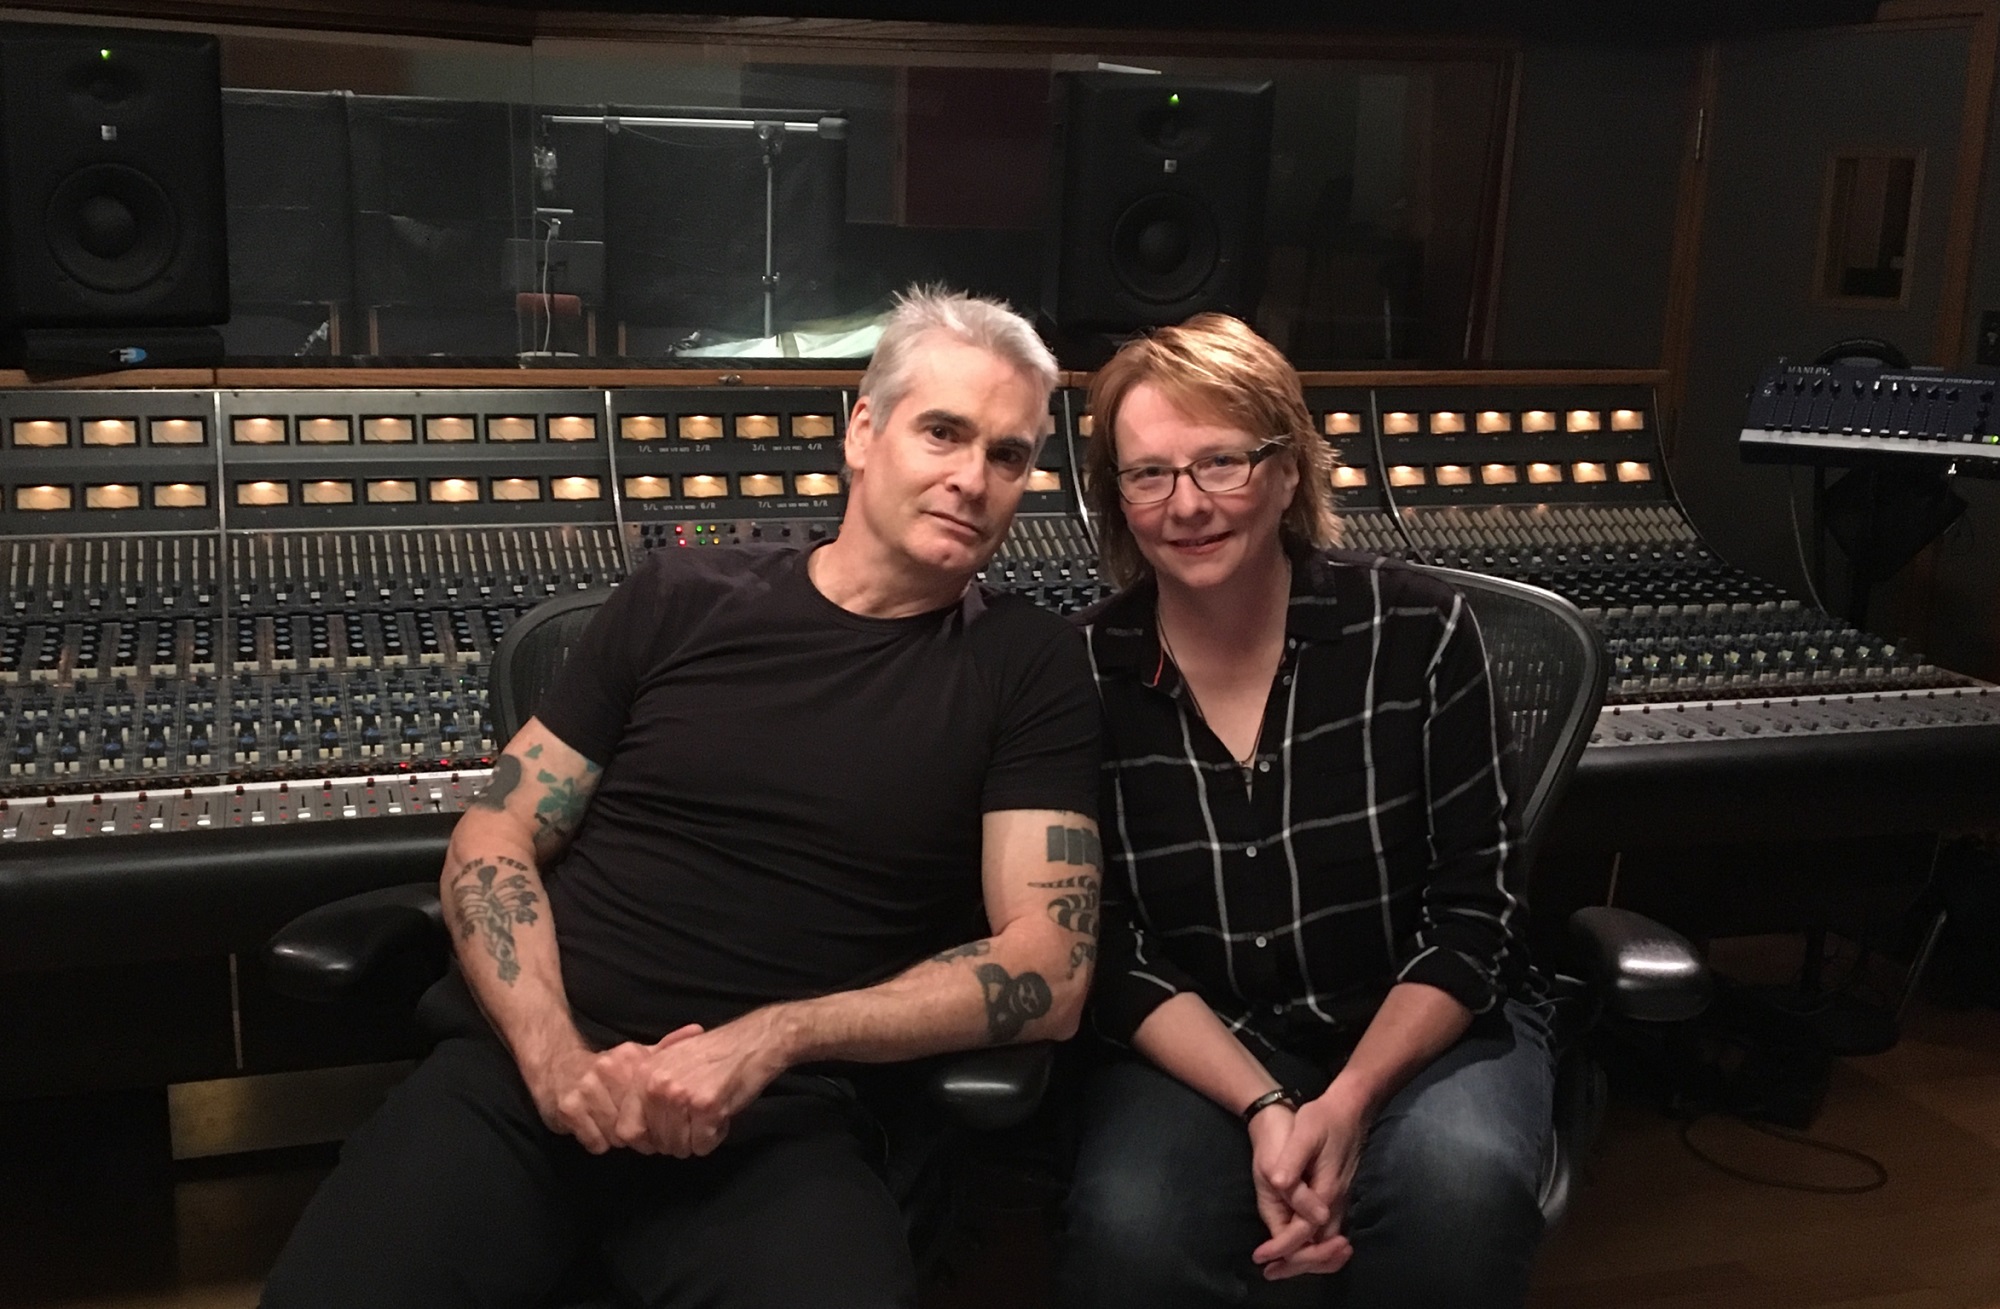 Artist Henry Rollins and music producer and Omnivore Recordings co-founder Cheryl Pawelski at Capitol Records. (Courtesy of Cheryl Pawelski)